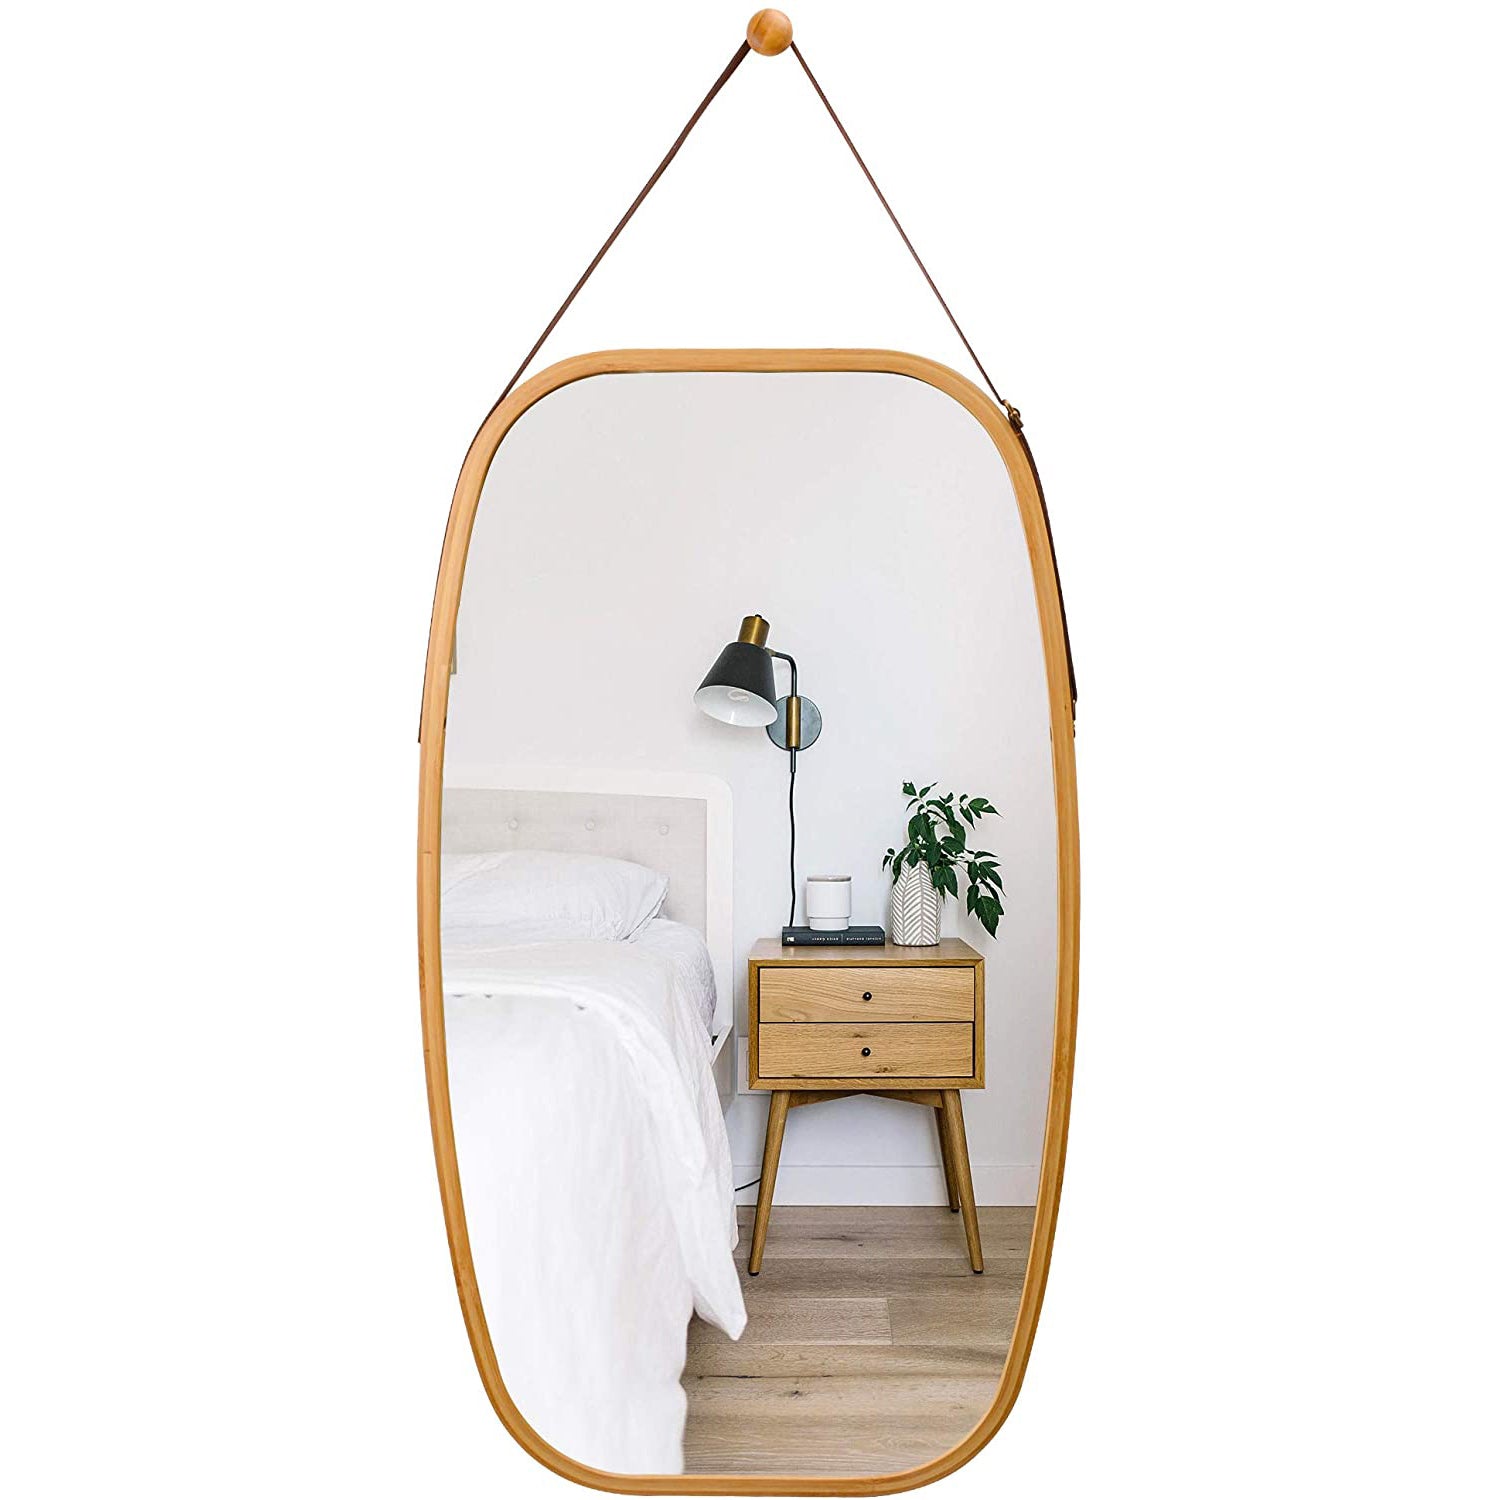 Full Length Bathroom Wall Mount Hanging Bamboo Frame Mirror Adjustable Strap Wall Mirror Home Decor Deals499